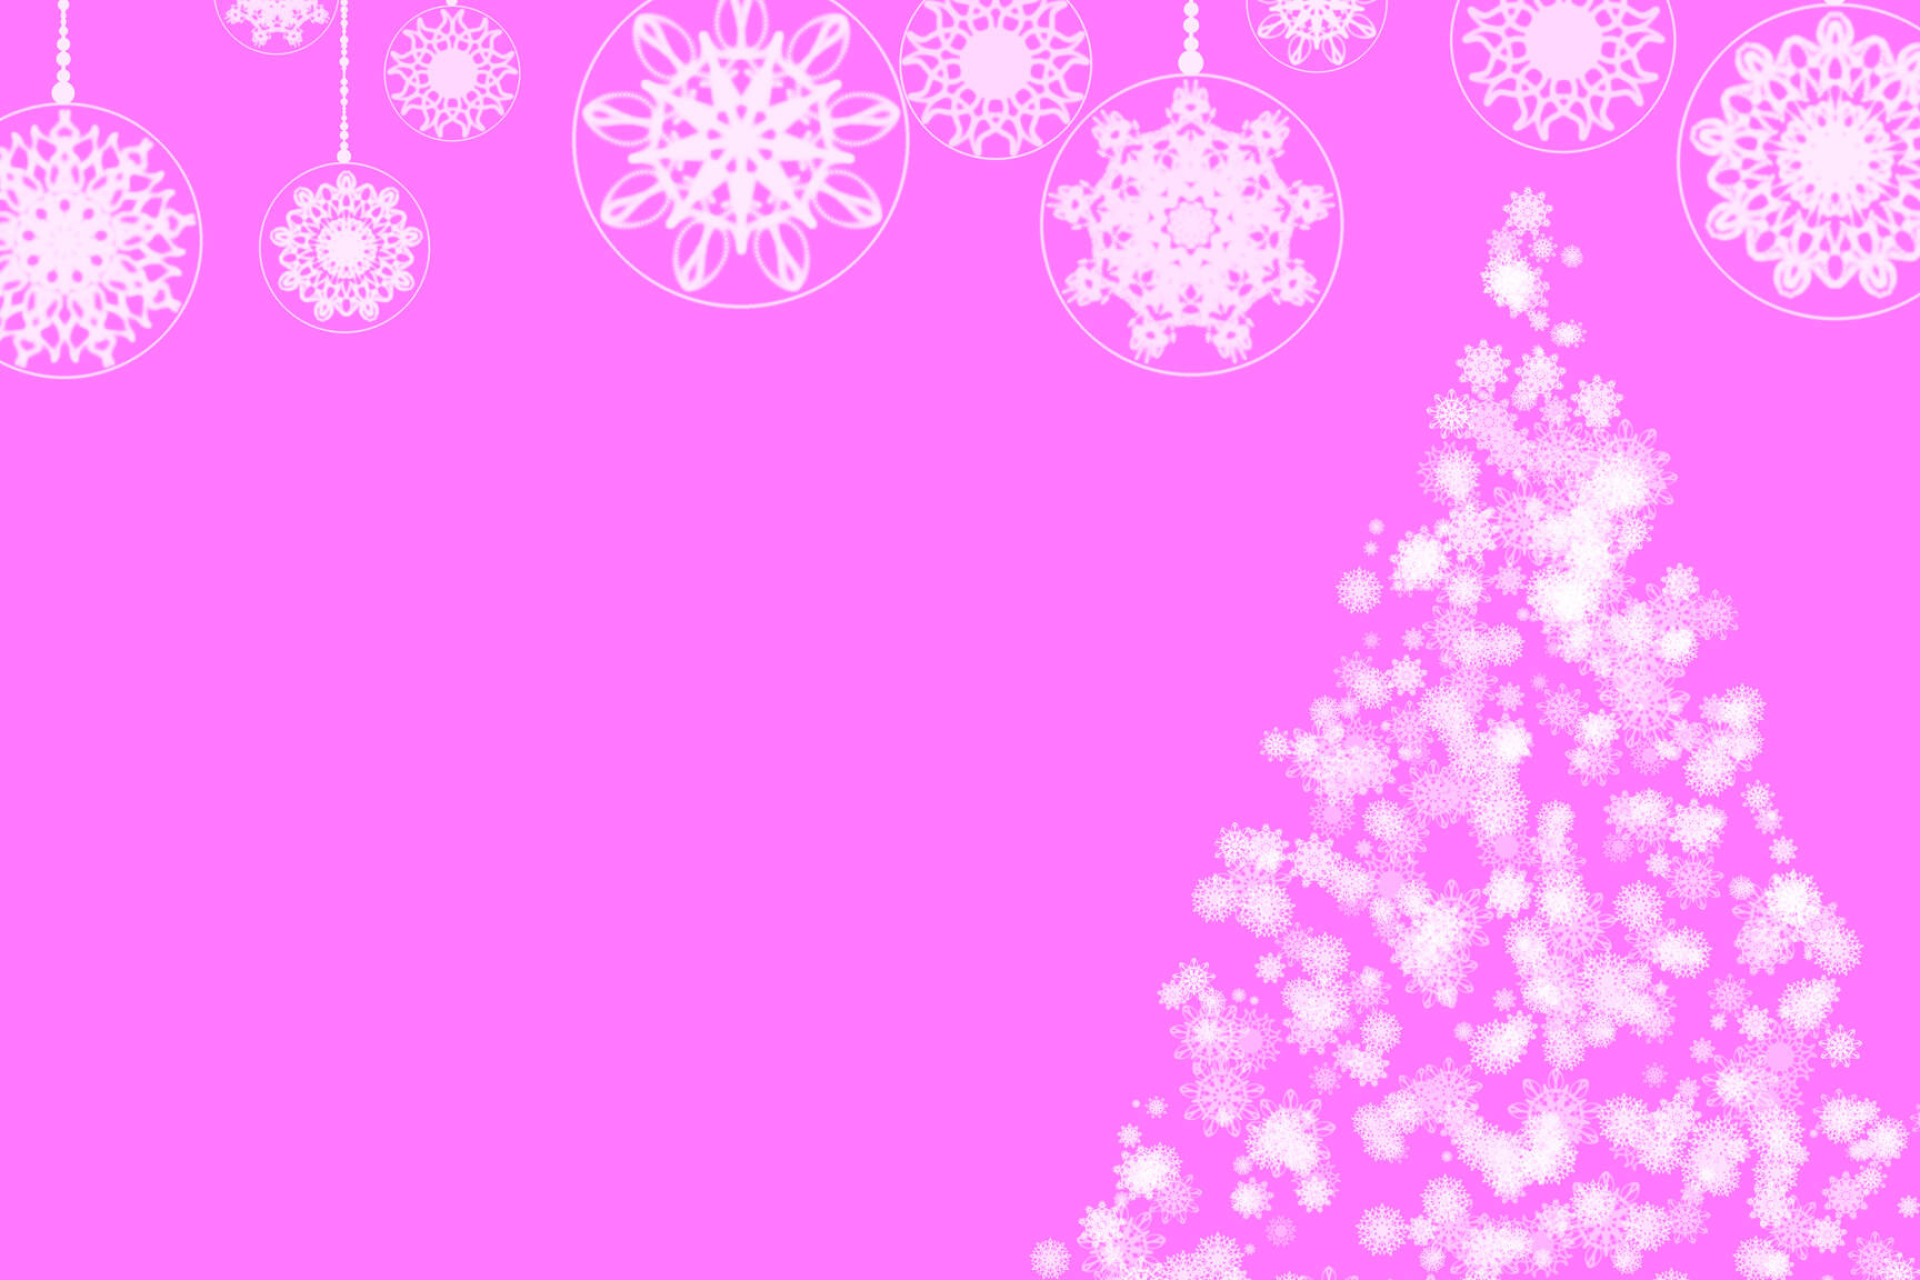 1920x1280 Christmas wallpapers image pink christmas and new year images clipart &acirc;&#132;&#150; 40685 | ~ free pics on cc-by license